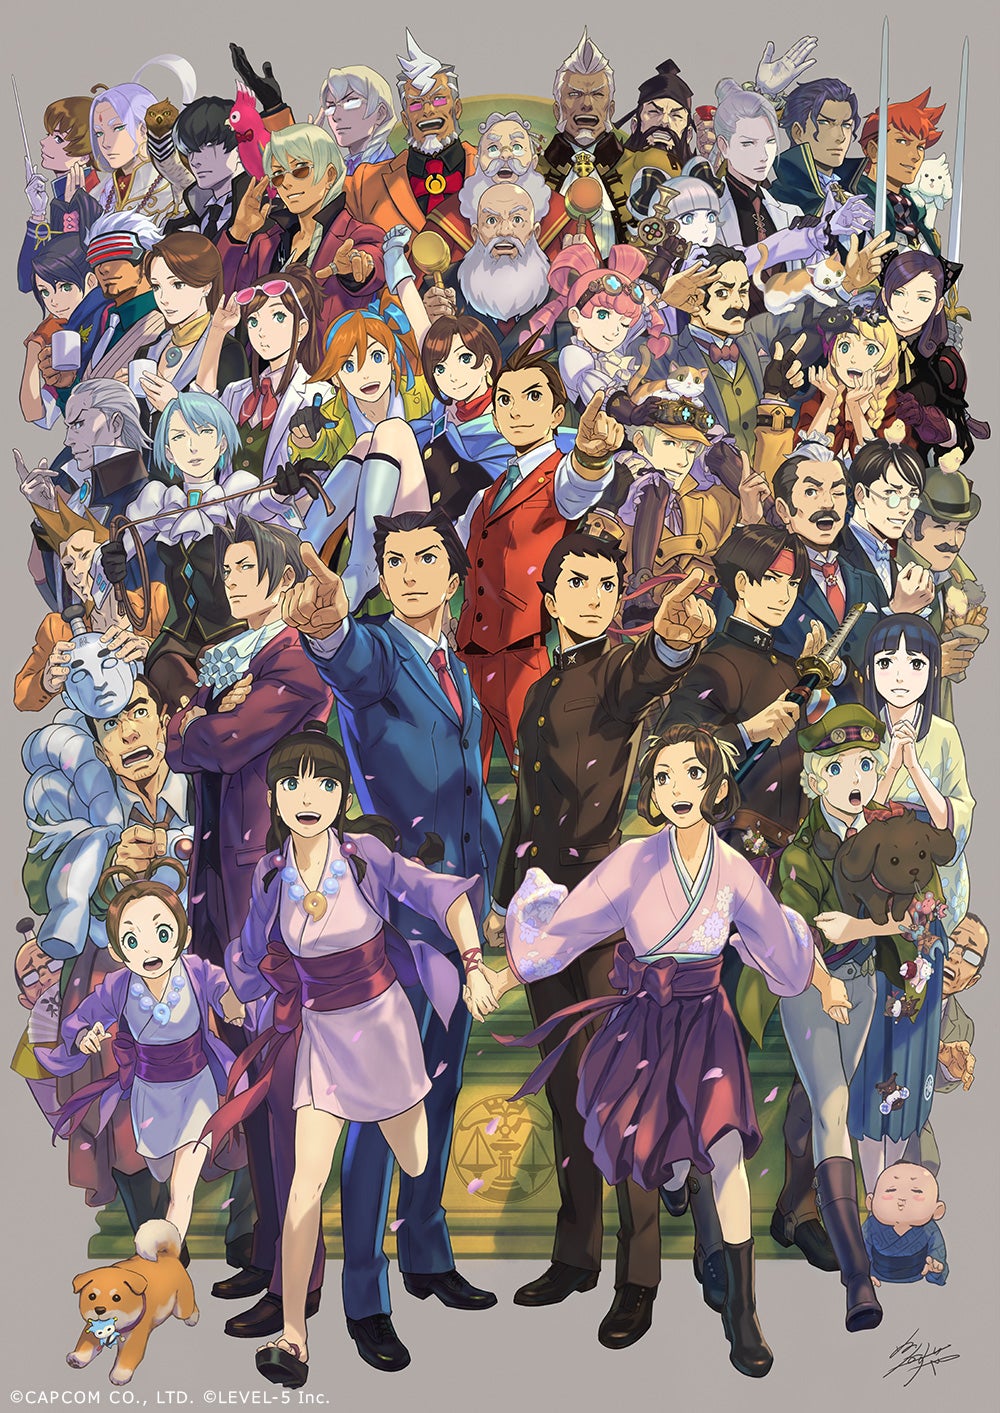 A group shot of most of the Ace Attorney characters from over the years, all standing together, looking outward and up slightly at the camera. And pointing. Obviously pointing.